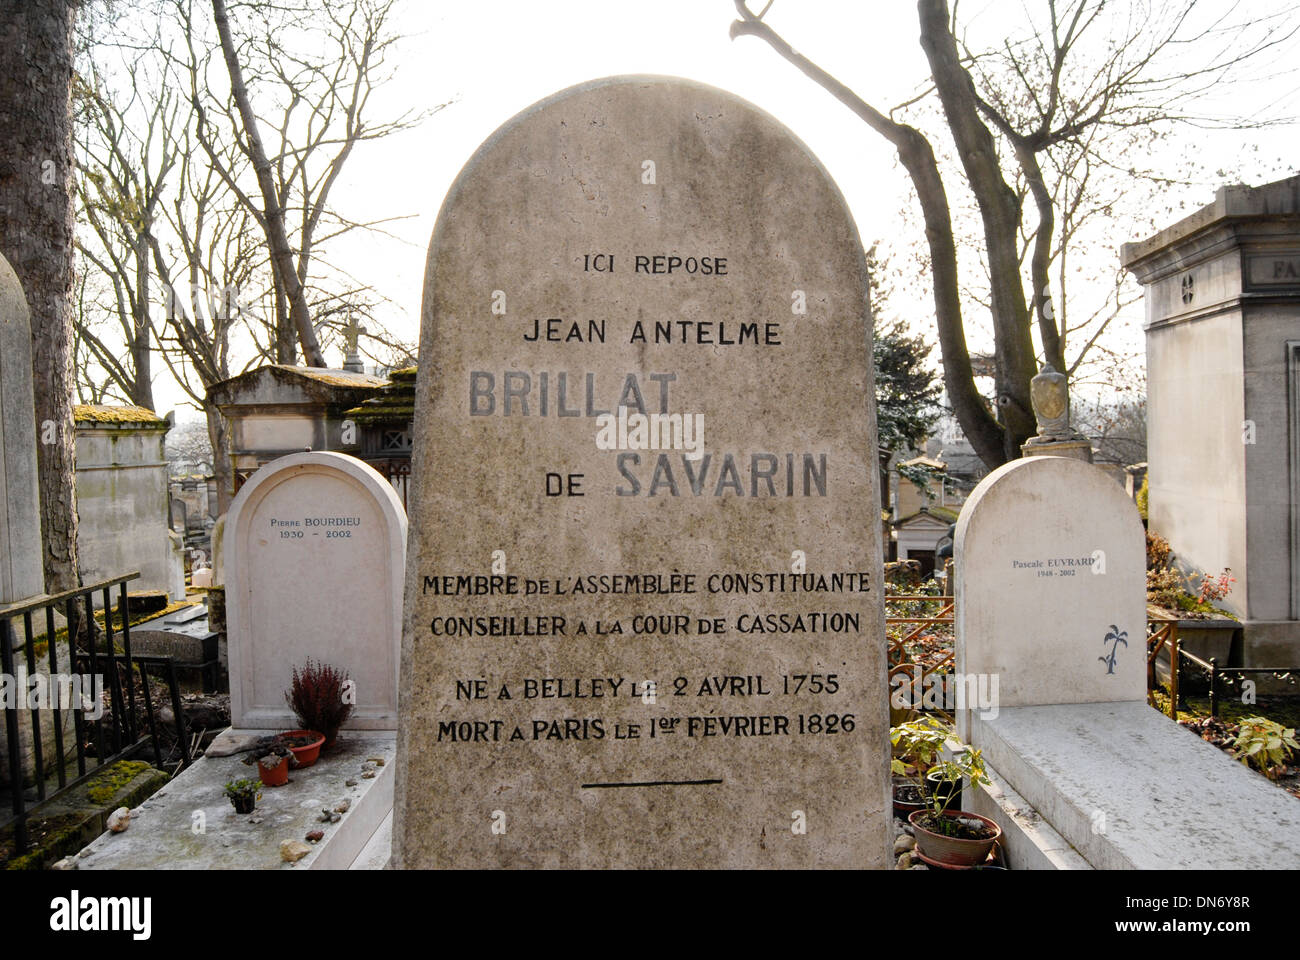 Tombstone of Brillat de Savarin in the Pere Lachaise cemetery Paris France Stock Photo